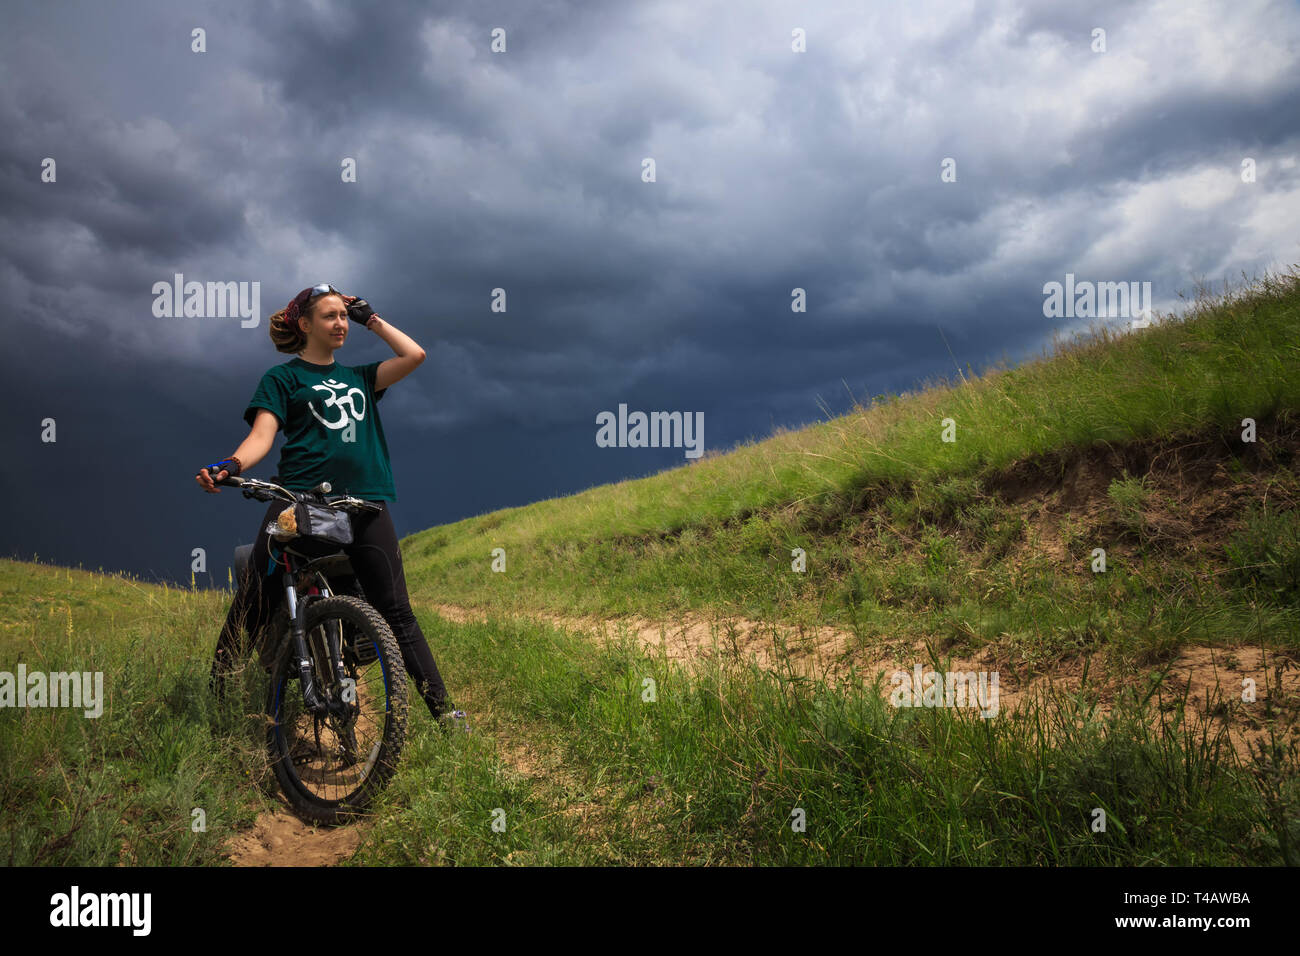 Brave, young girl on a bike outdoors on the background of the thunderhead front. She is in outdoors in stormy weather. Girl smiling Stock Photo